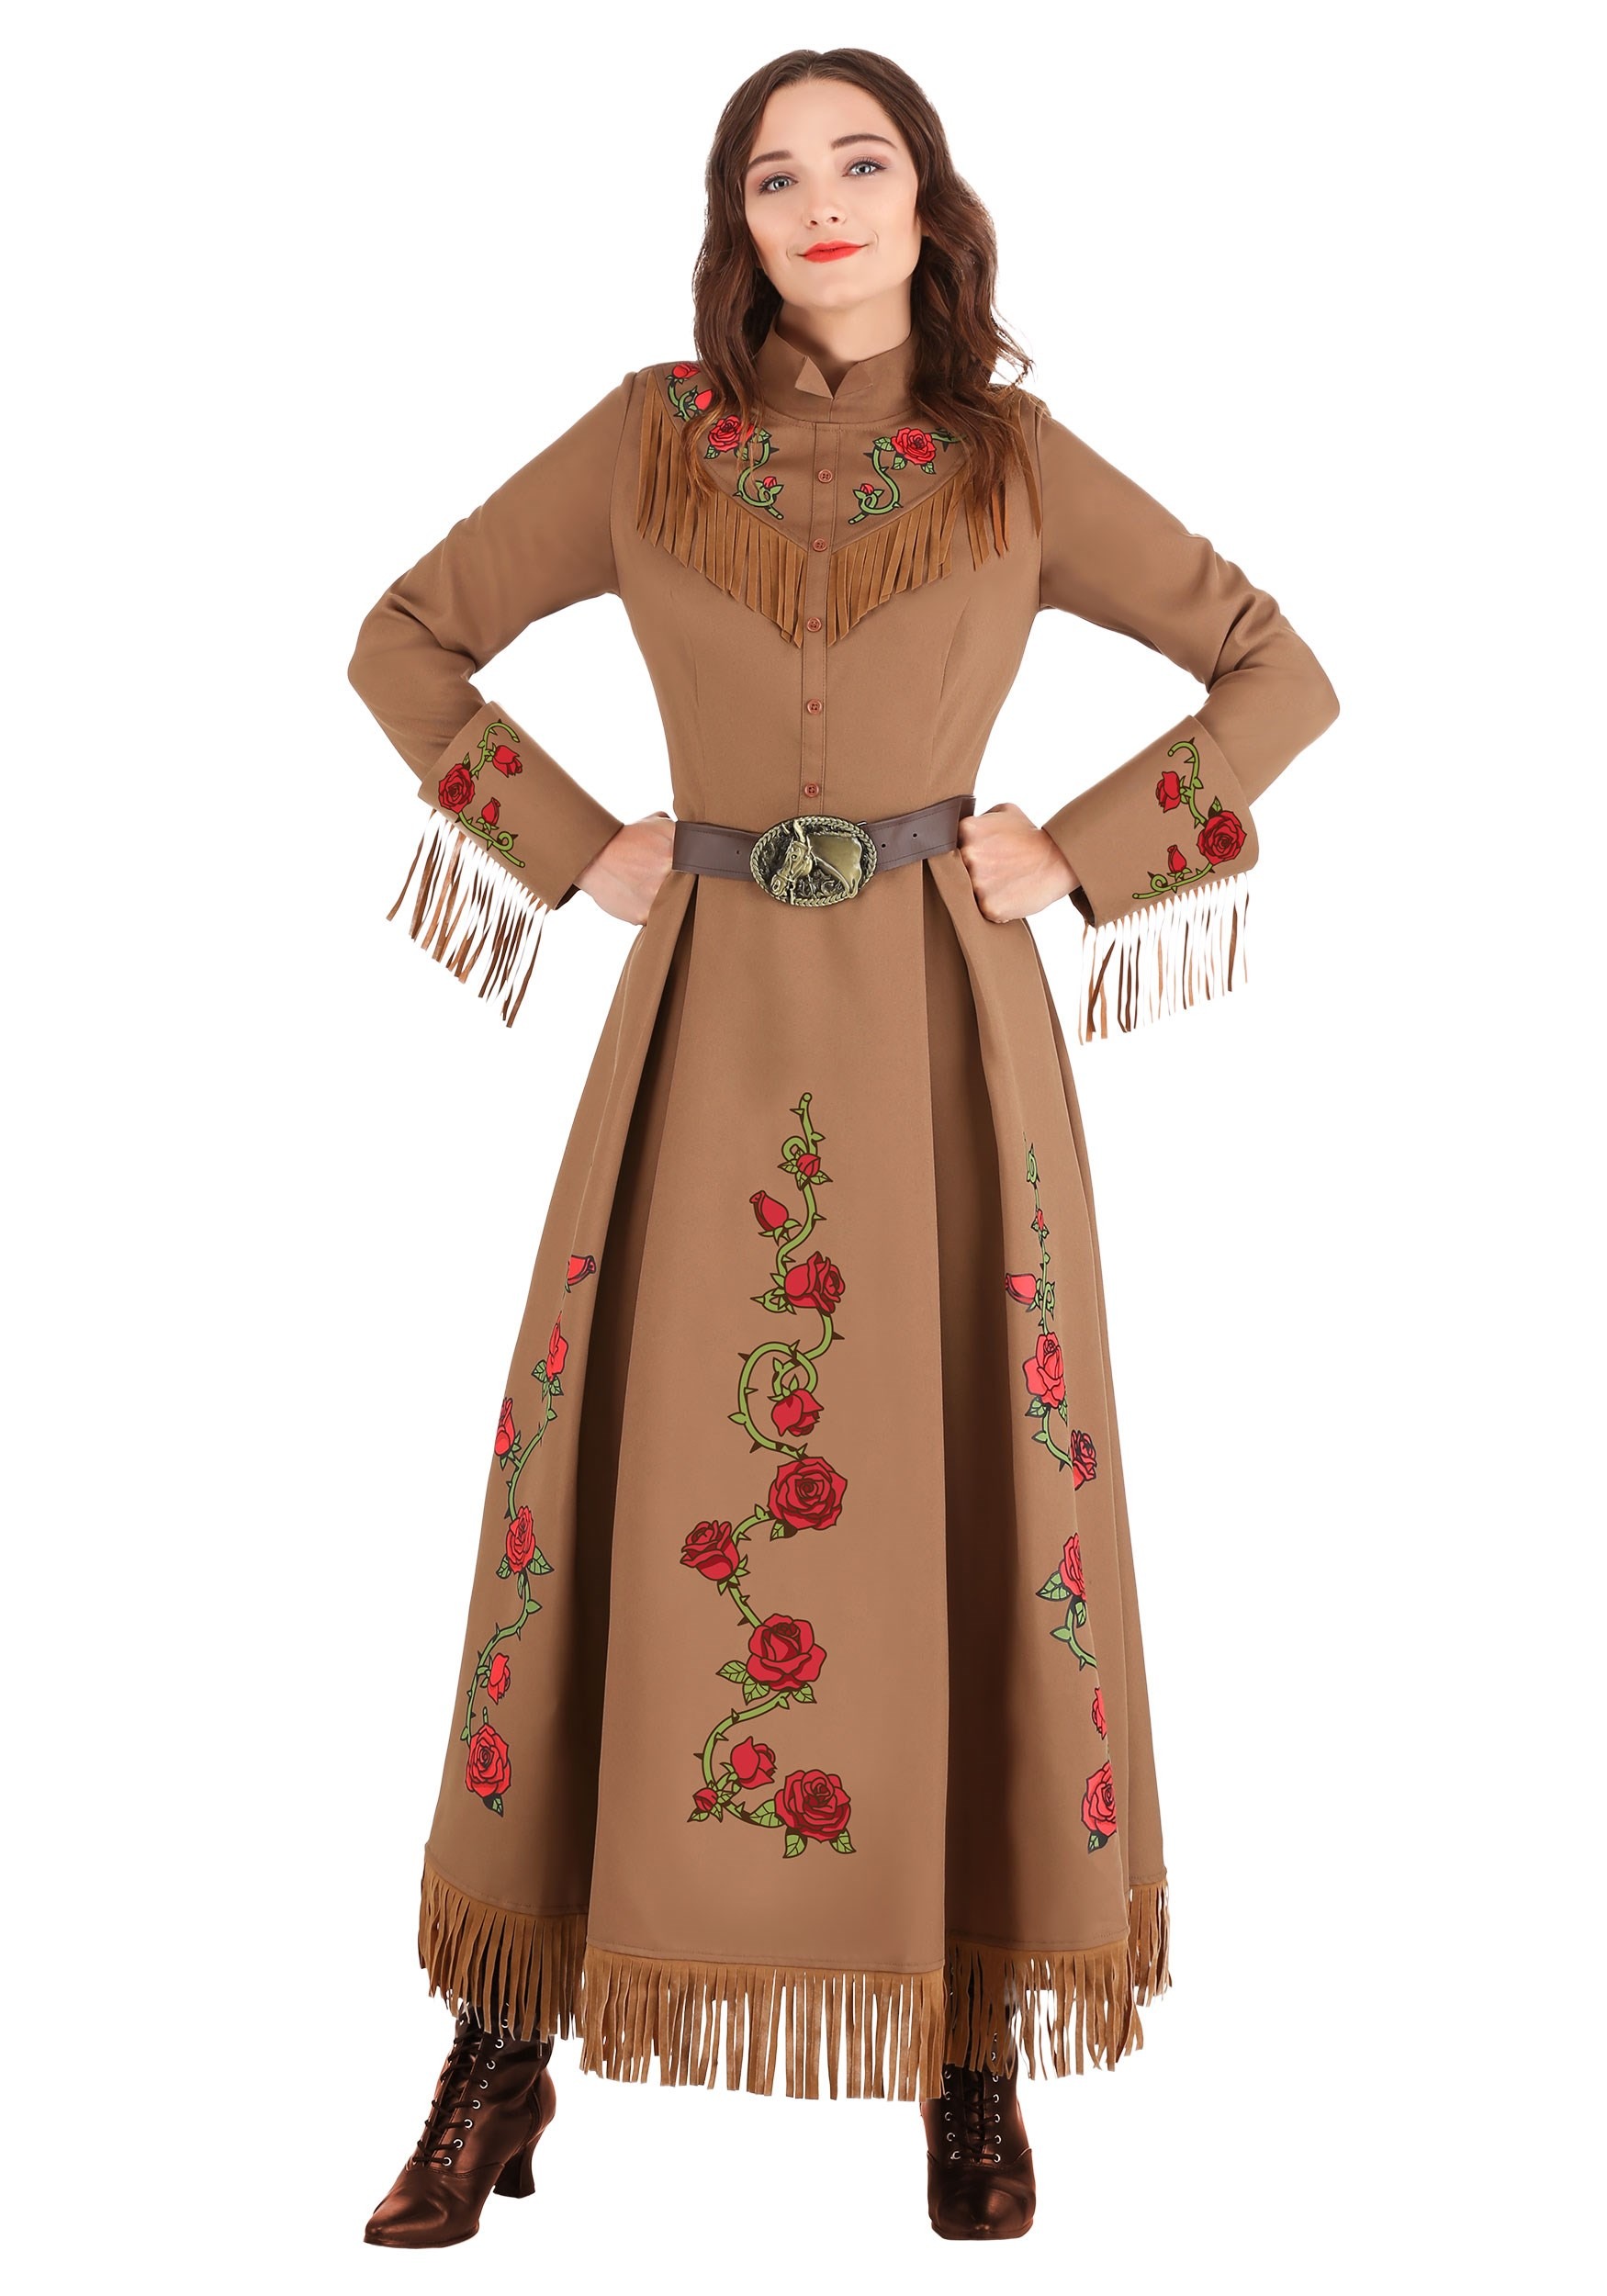 Annie Oakley Cowgirl Womens Costume | Cowgirl Costumes